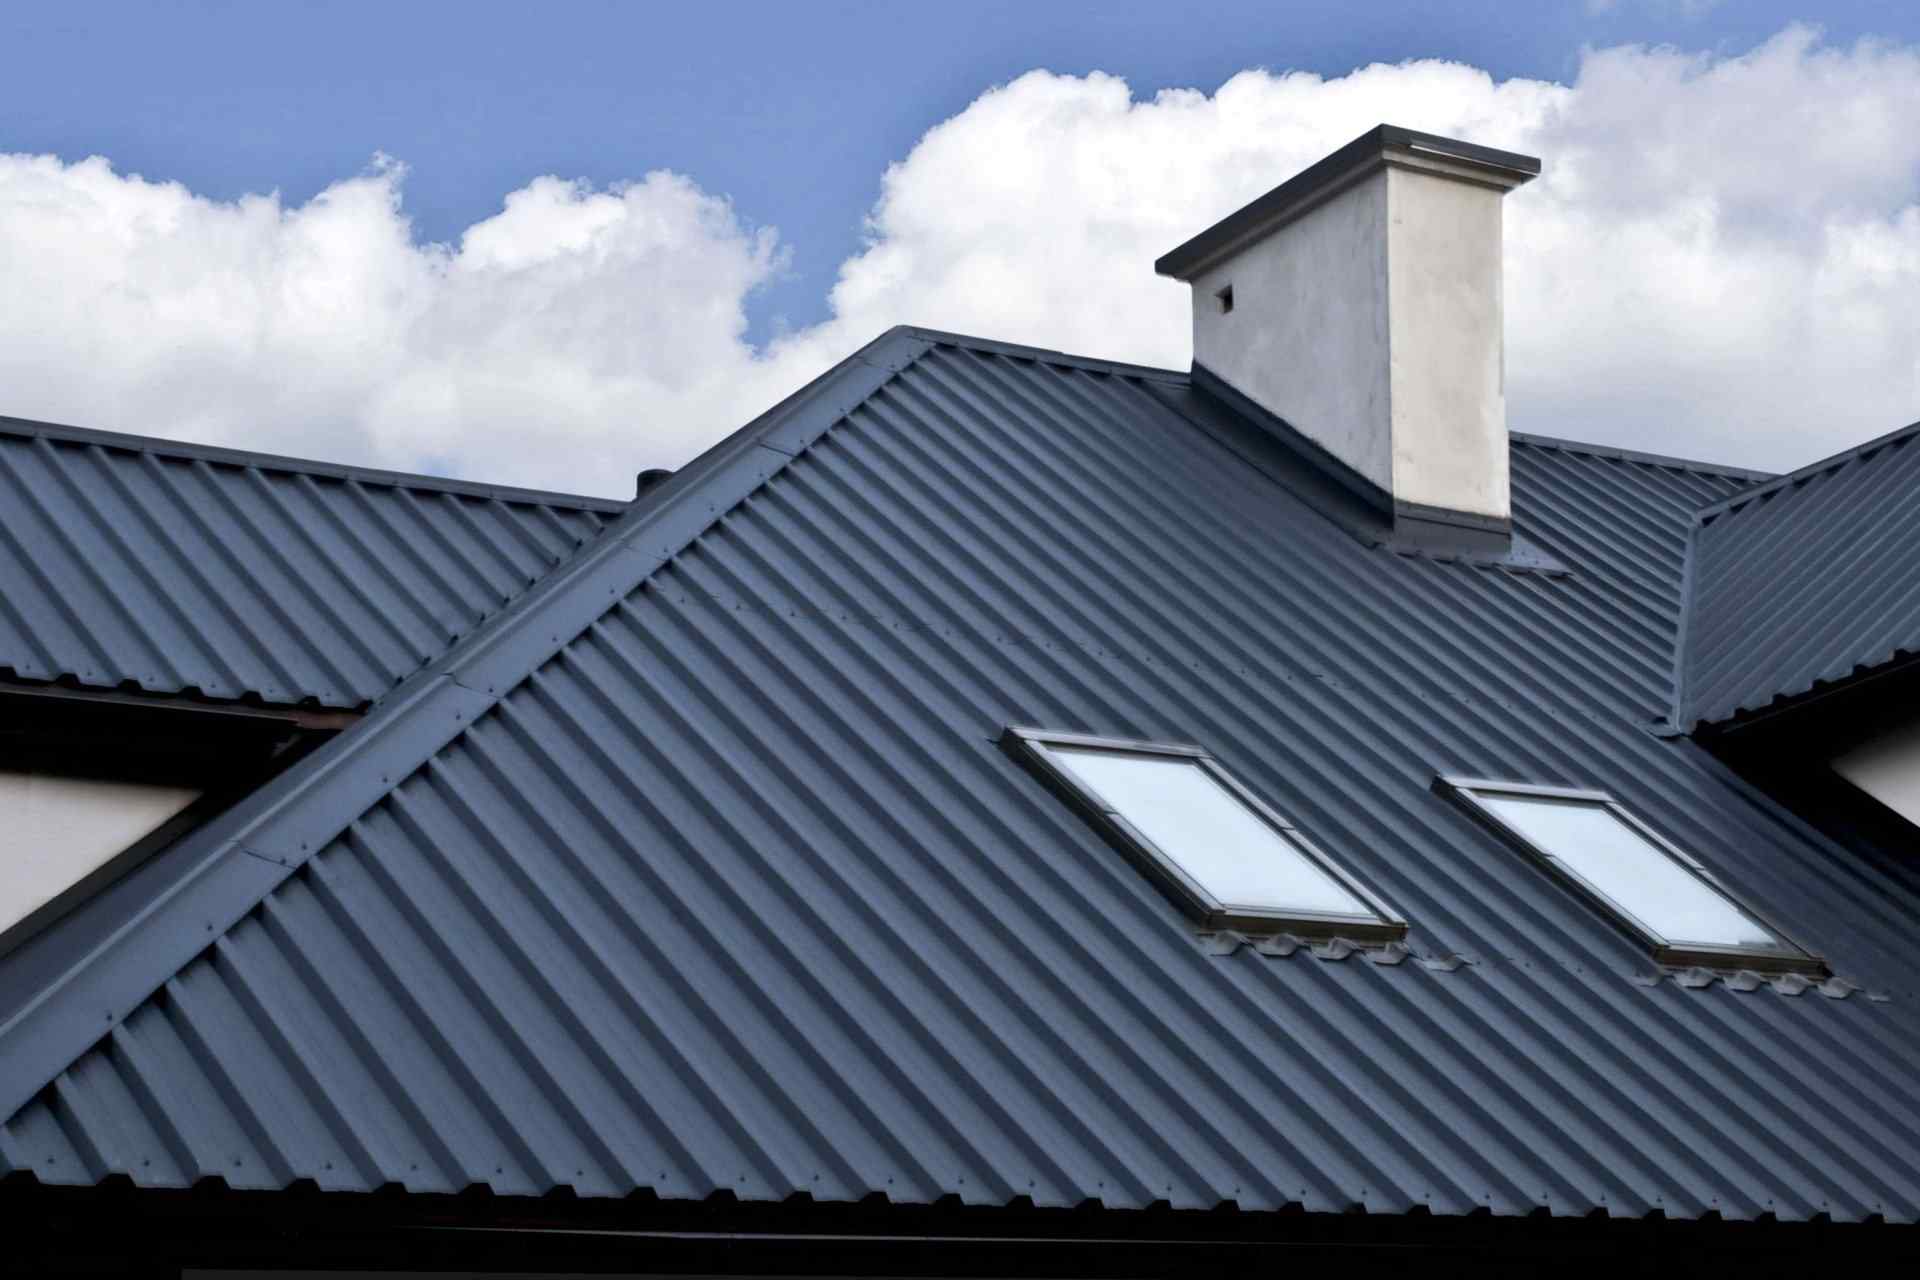 Professional Metal Roofing Panels Installation In Dillon SC